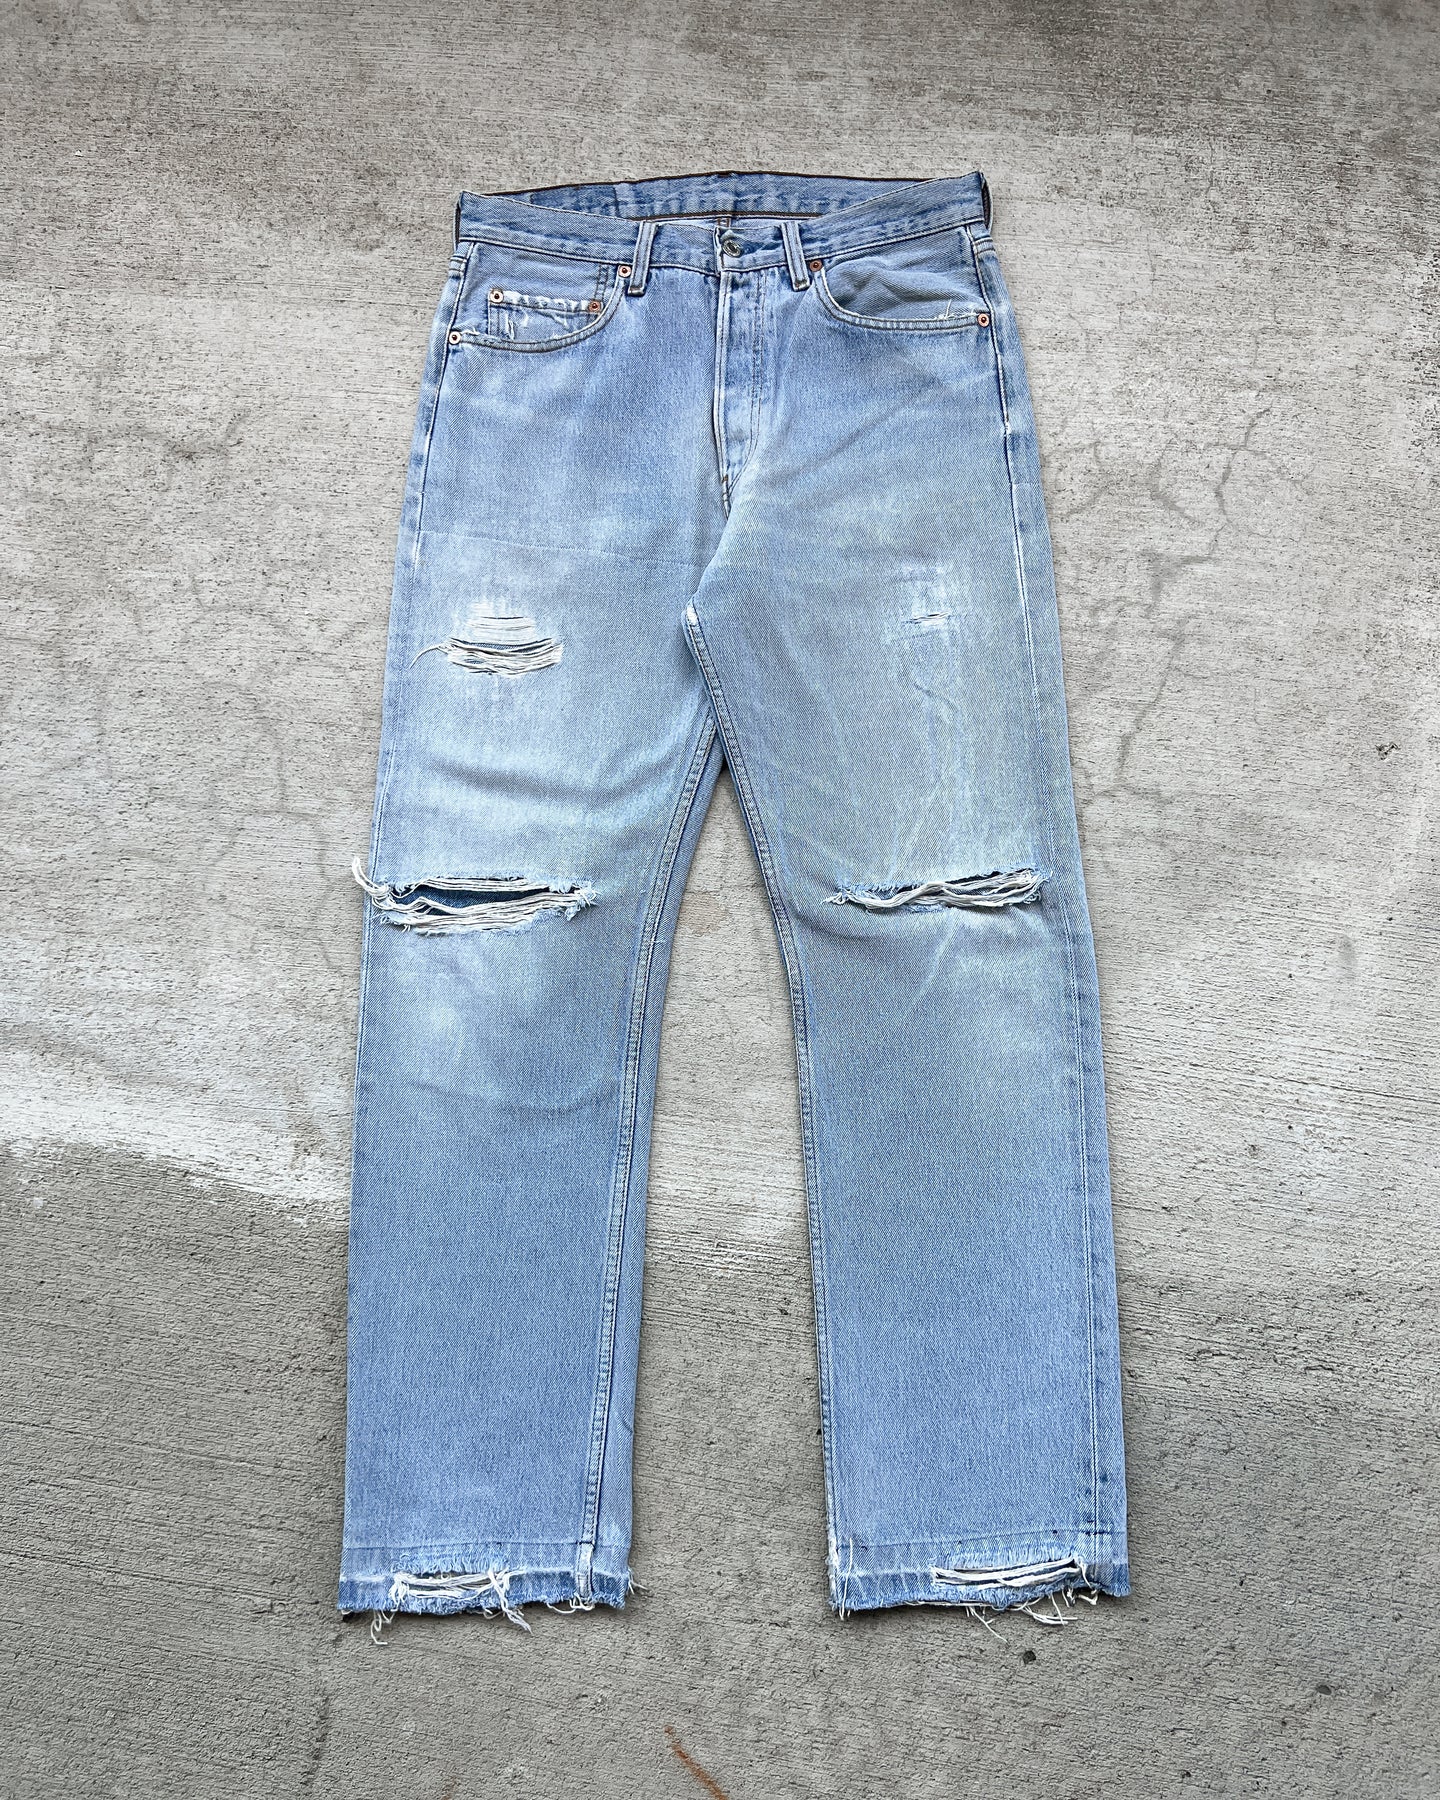 1990s Levi's Two Tone Repaired 501 - Size 32 x 30